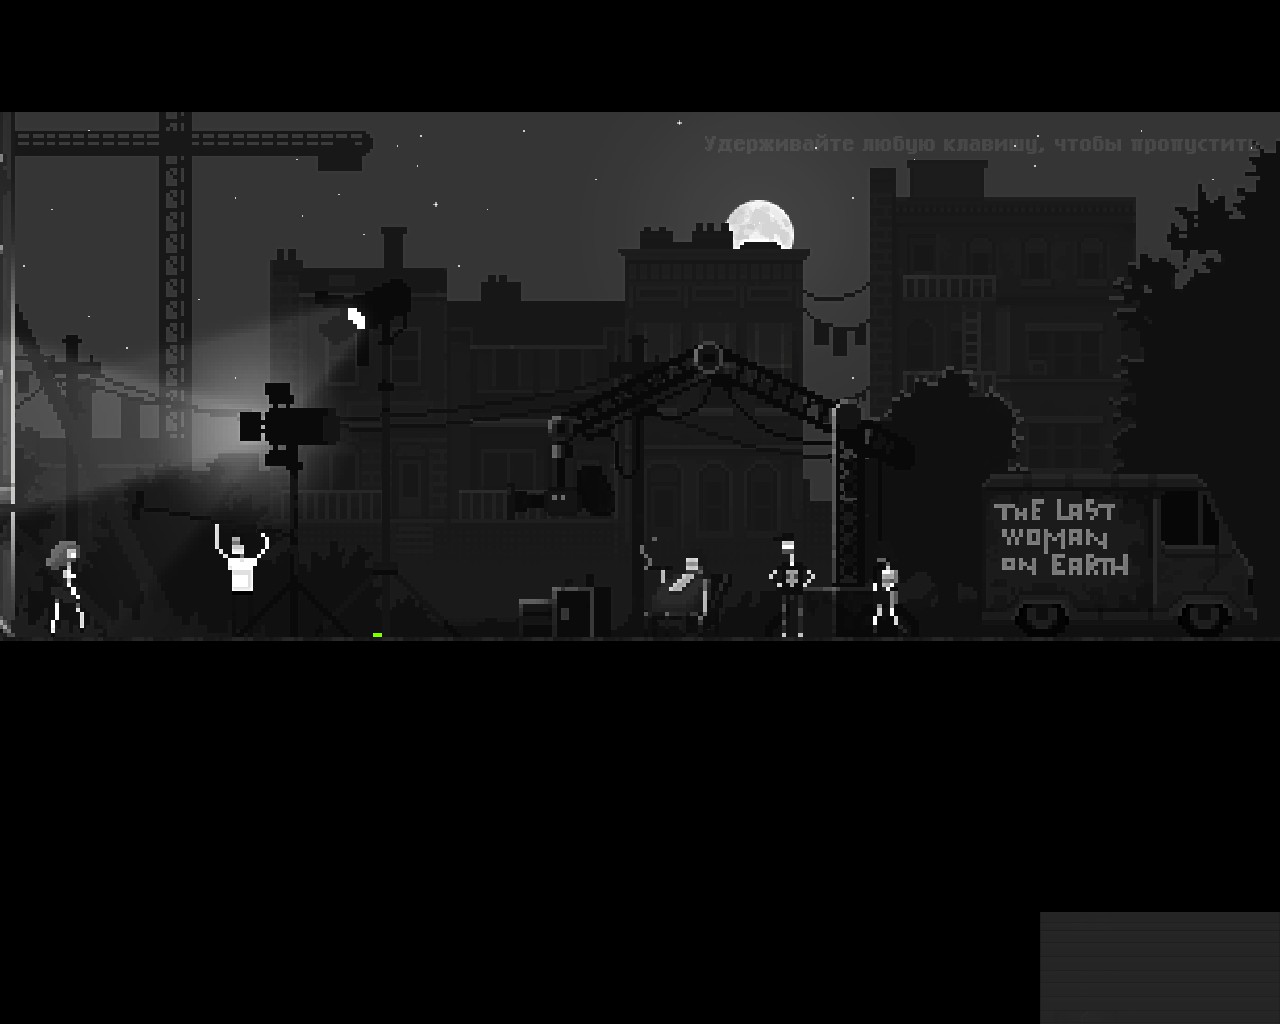 download night terror steam for free